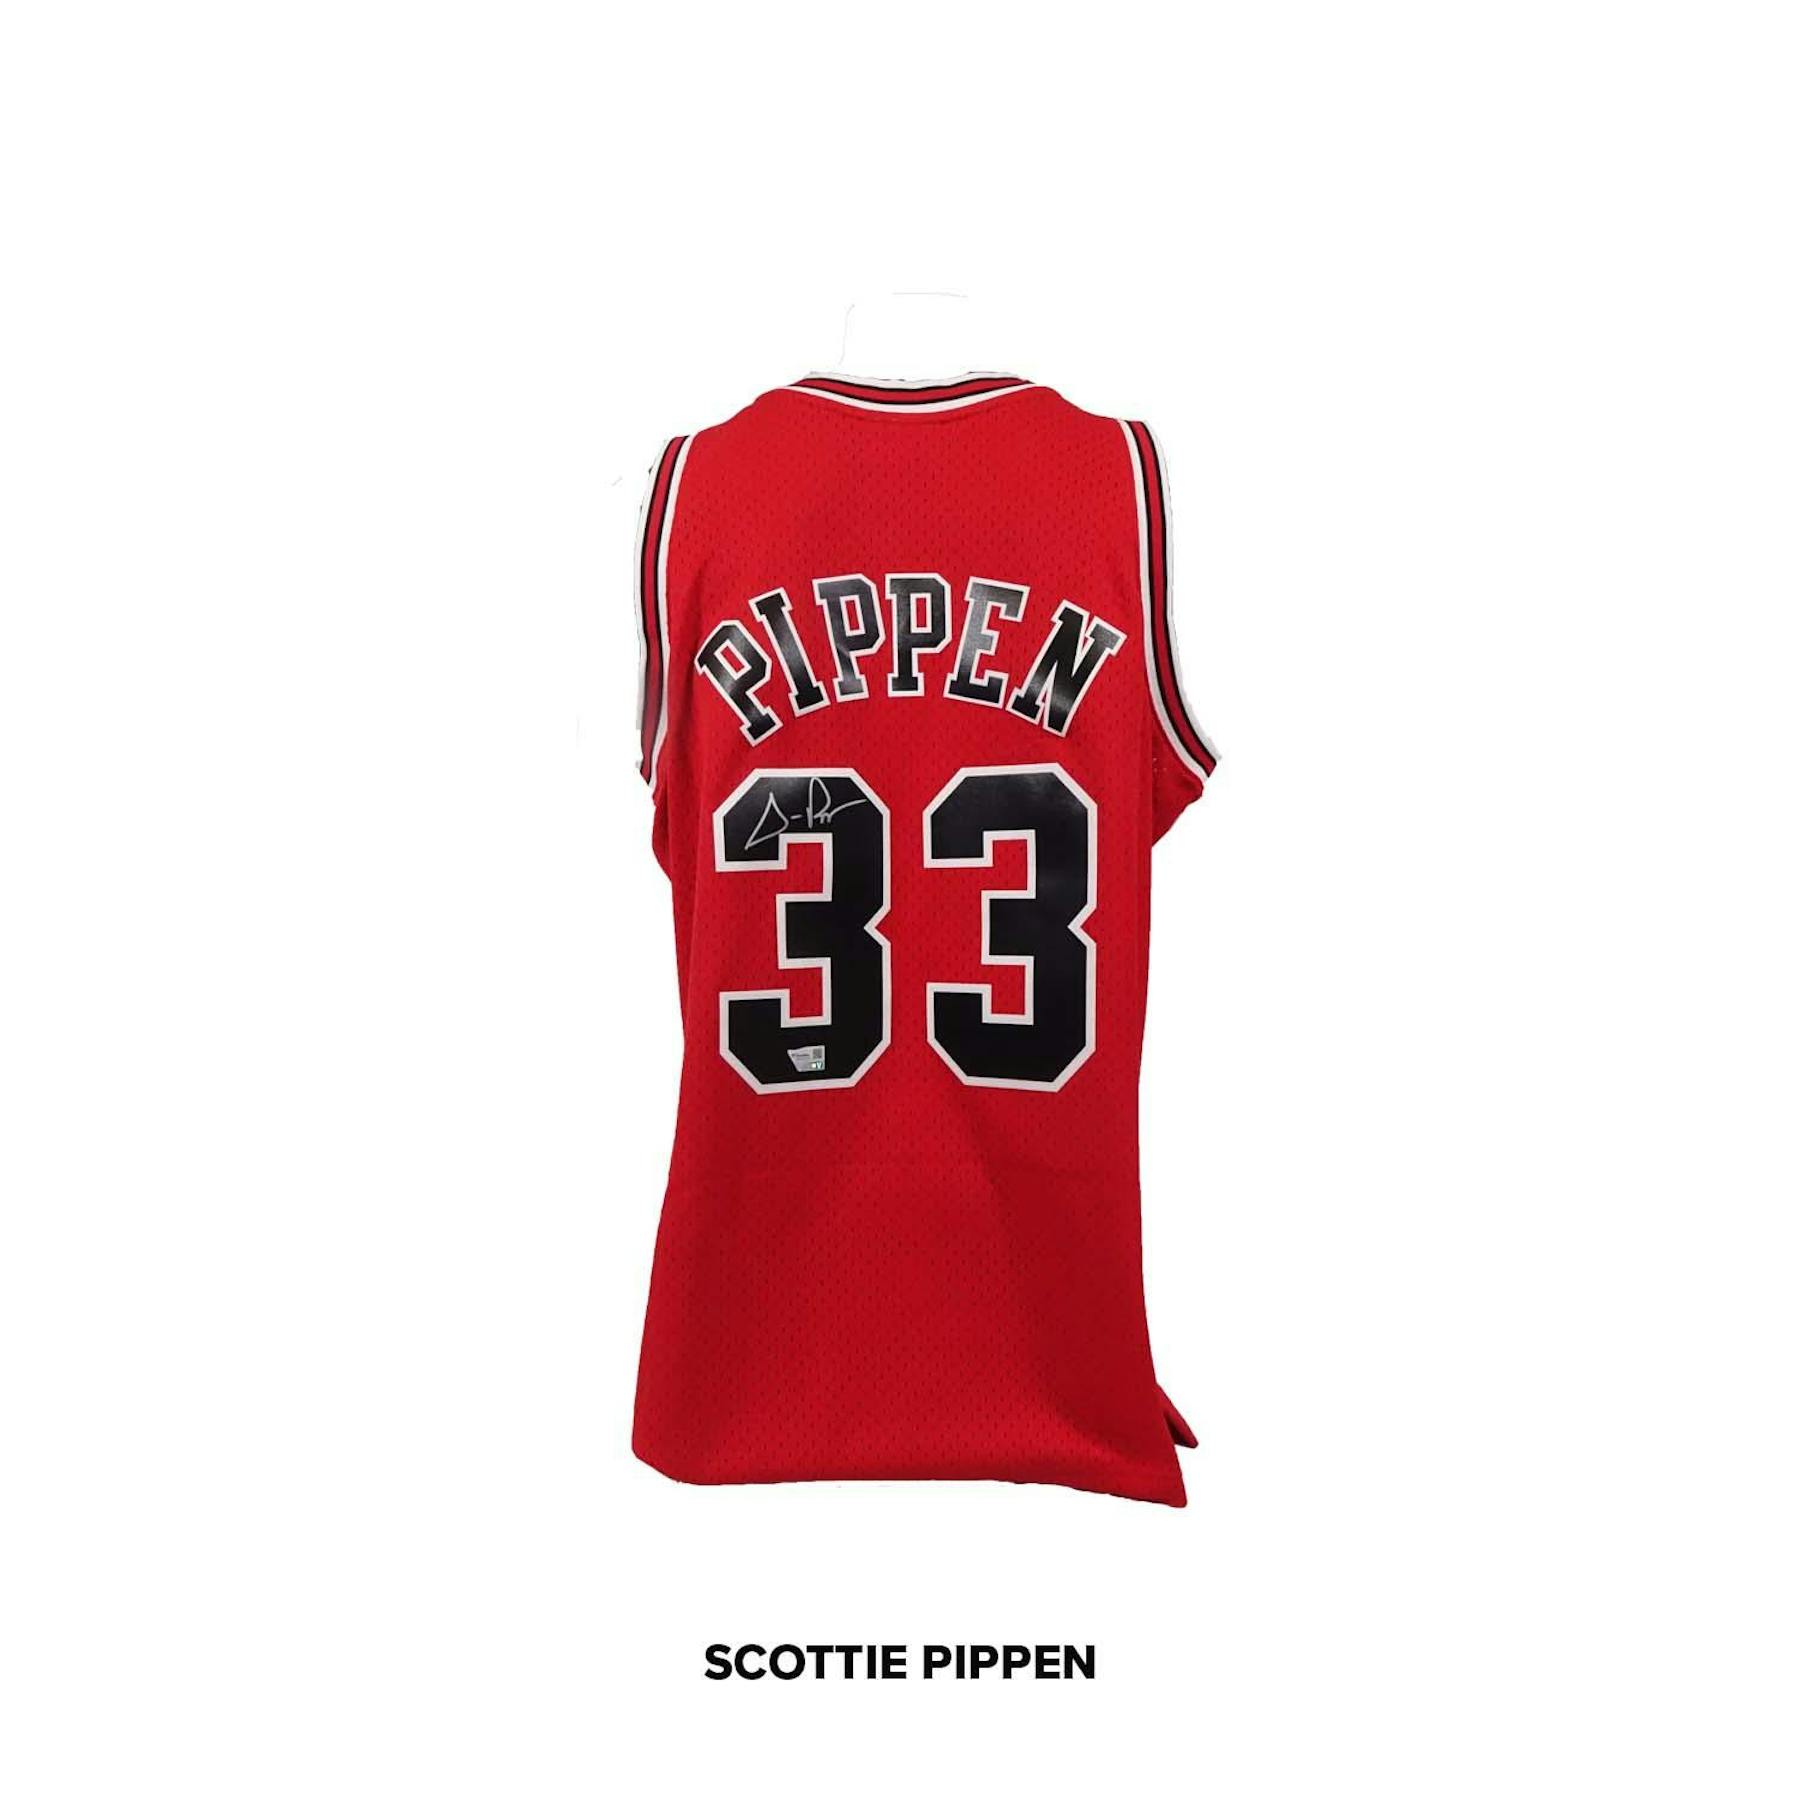 2020/21 Hit Parade Autographed Basketball Jersey - Series 37